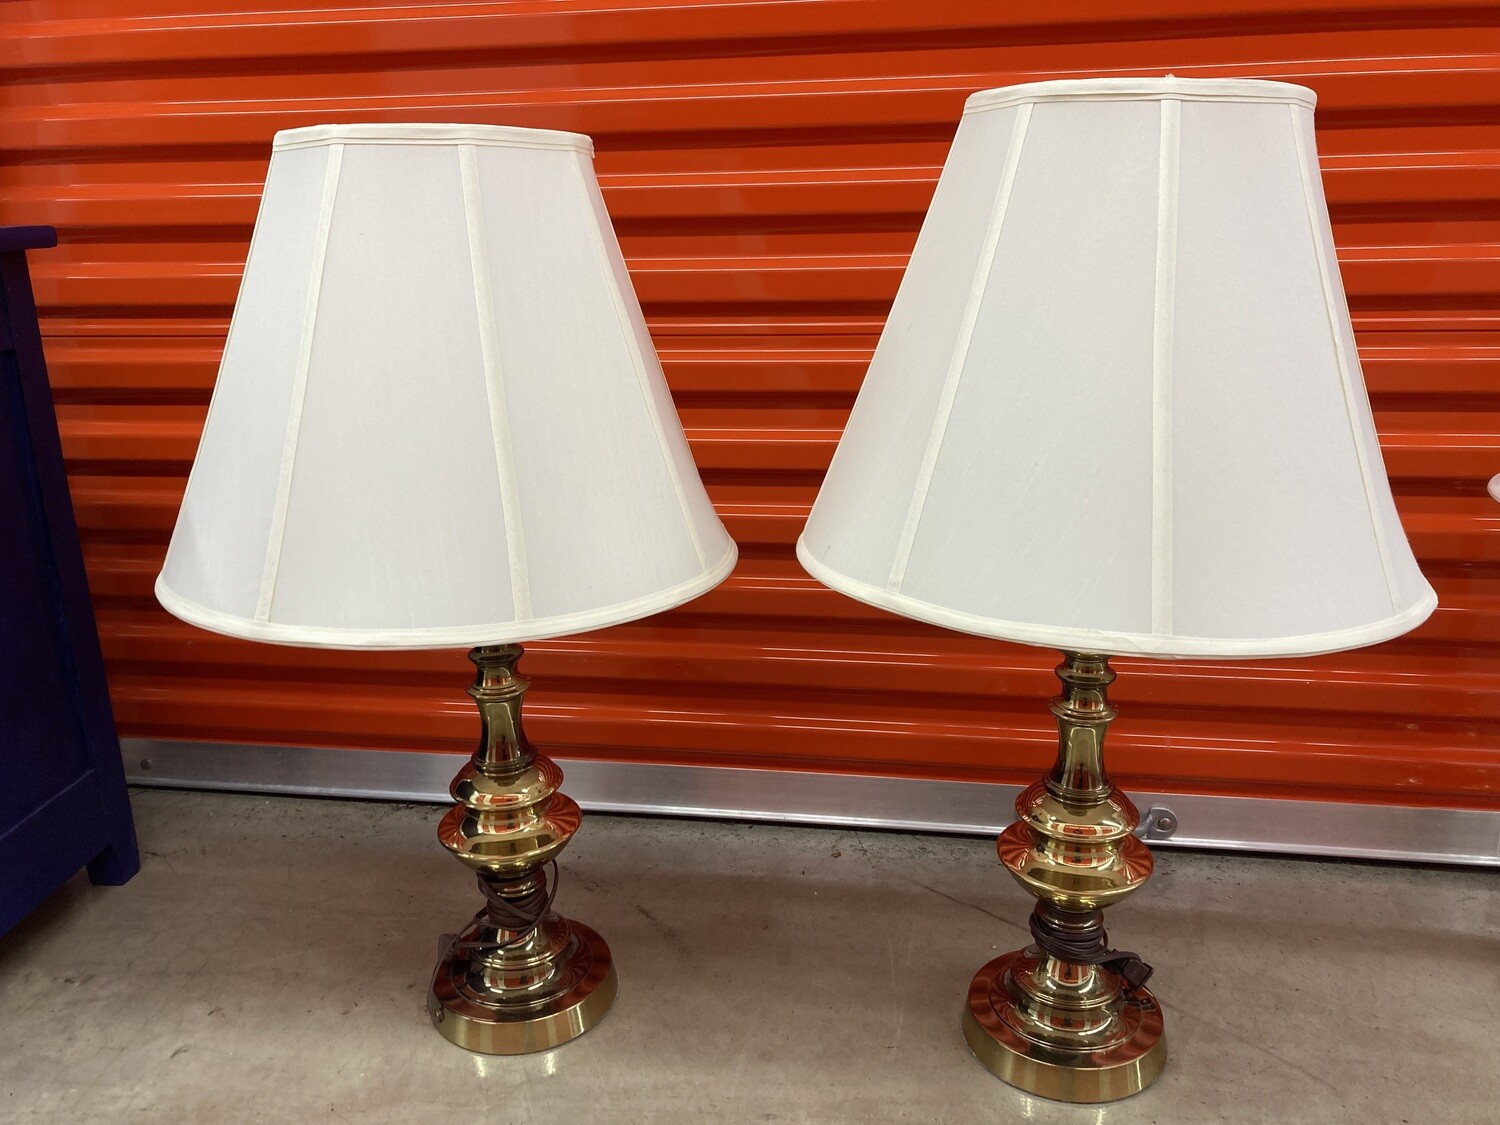 Matching Gold Lamps w/ cream shades #2103